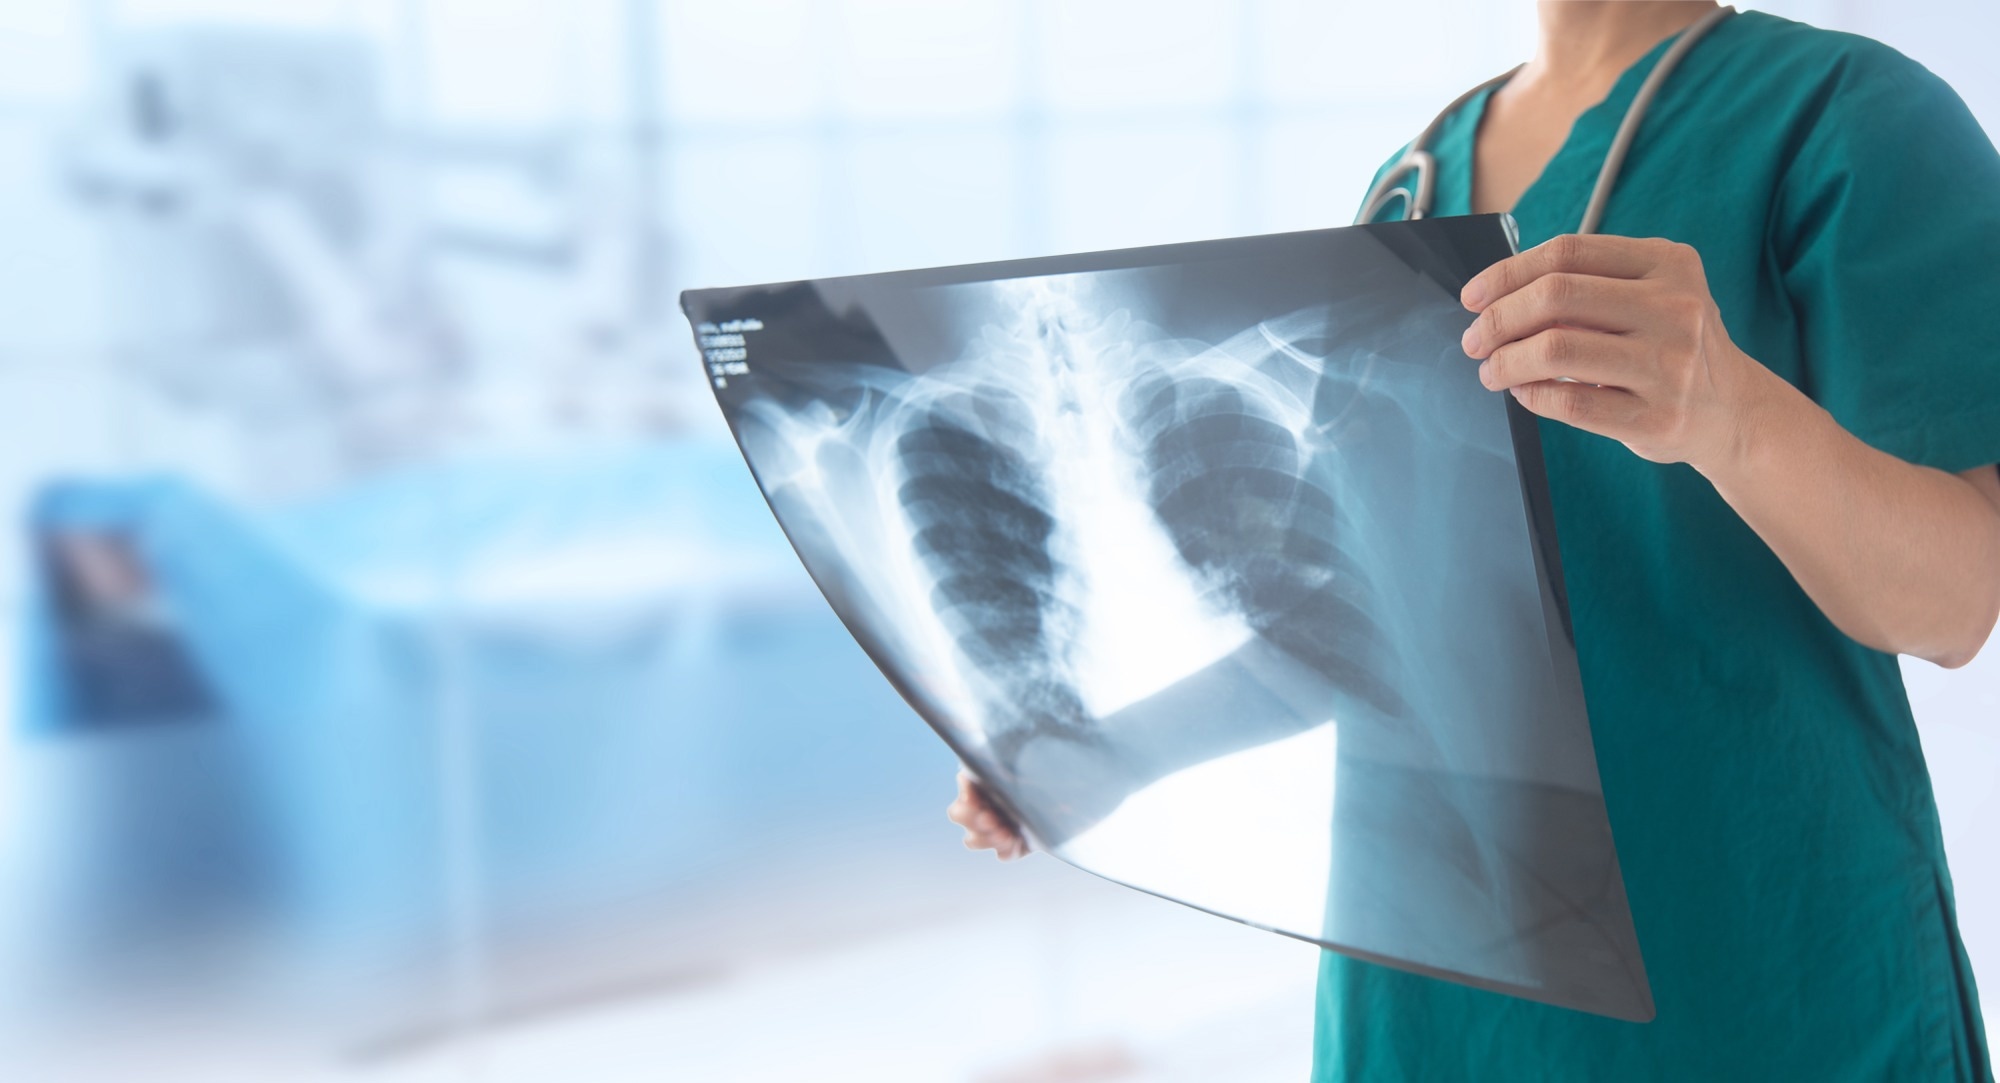 Study: Longitudinal Assessment of Chest CT Findings and Pulmonary Function in Patients after COVID-19. Image Credit: create jobs 51 / Shutterstock